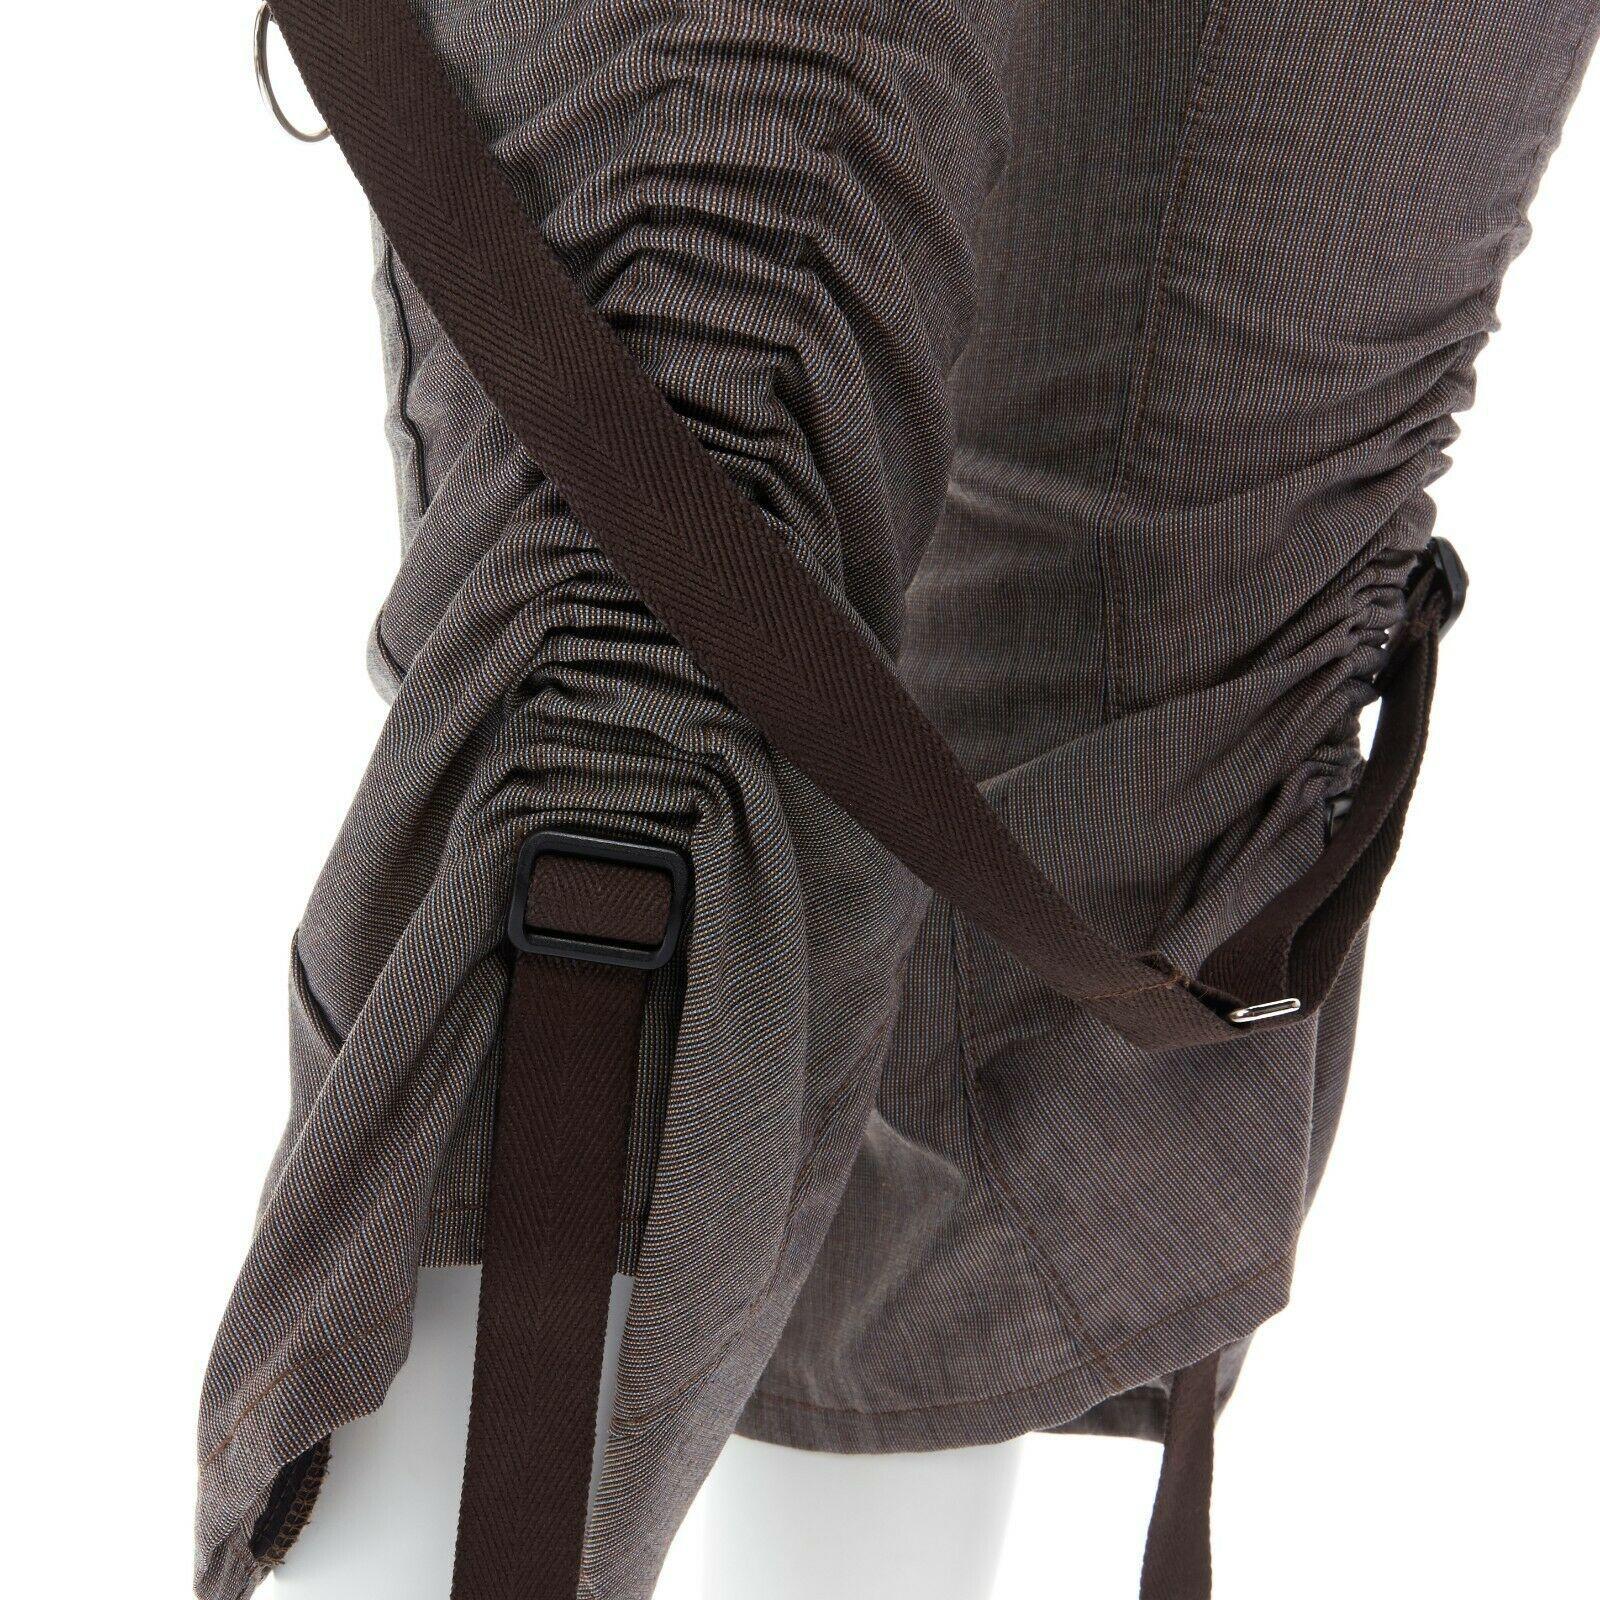 runway JUNYA WATANABE SS2003 Parachute brown bondage harness buckle belt pants S

JUNYA WATANABE COMME DES GARCONS
FROM THE SPRING SUMMER 2002 COLLECTION
WOOL, COTTON . GREYISH BROWN PANTS . CONTRAST BROWN RIBBON STRAPS THROUGHOUT . 
PARACHUTE